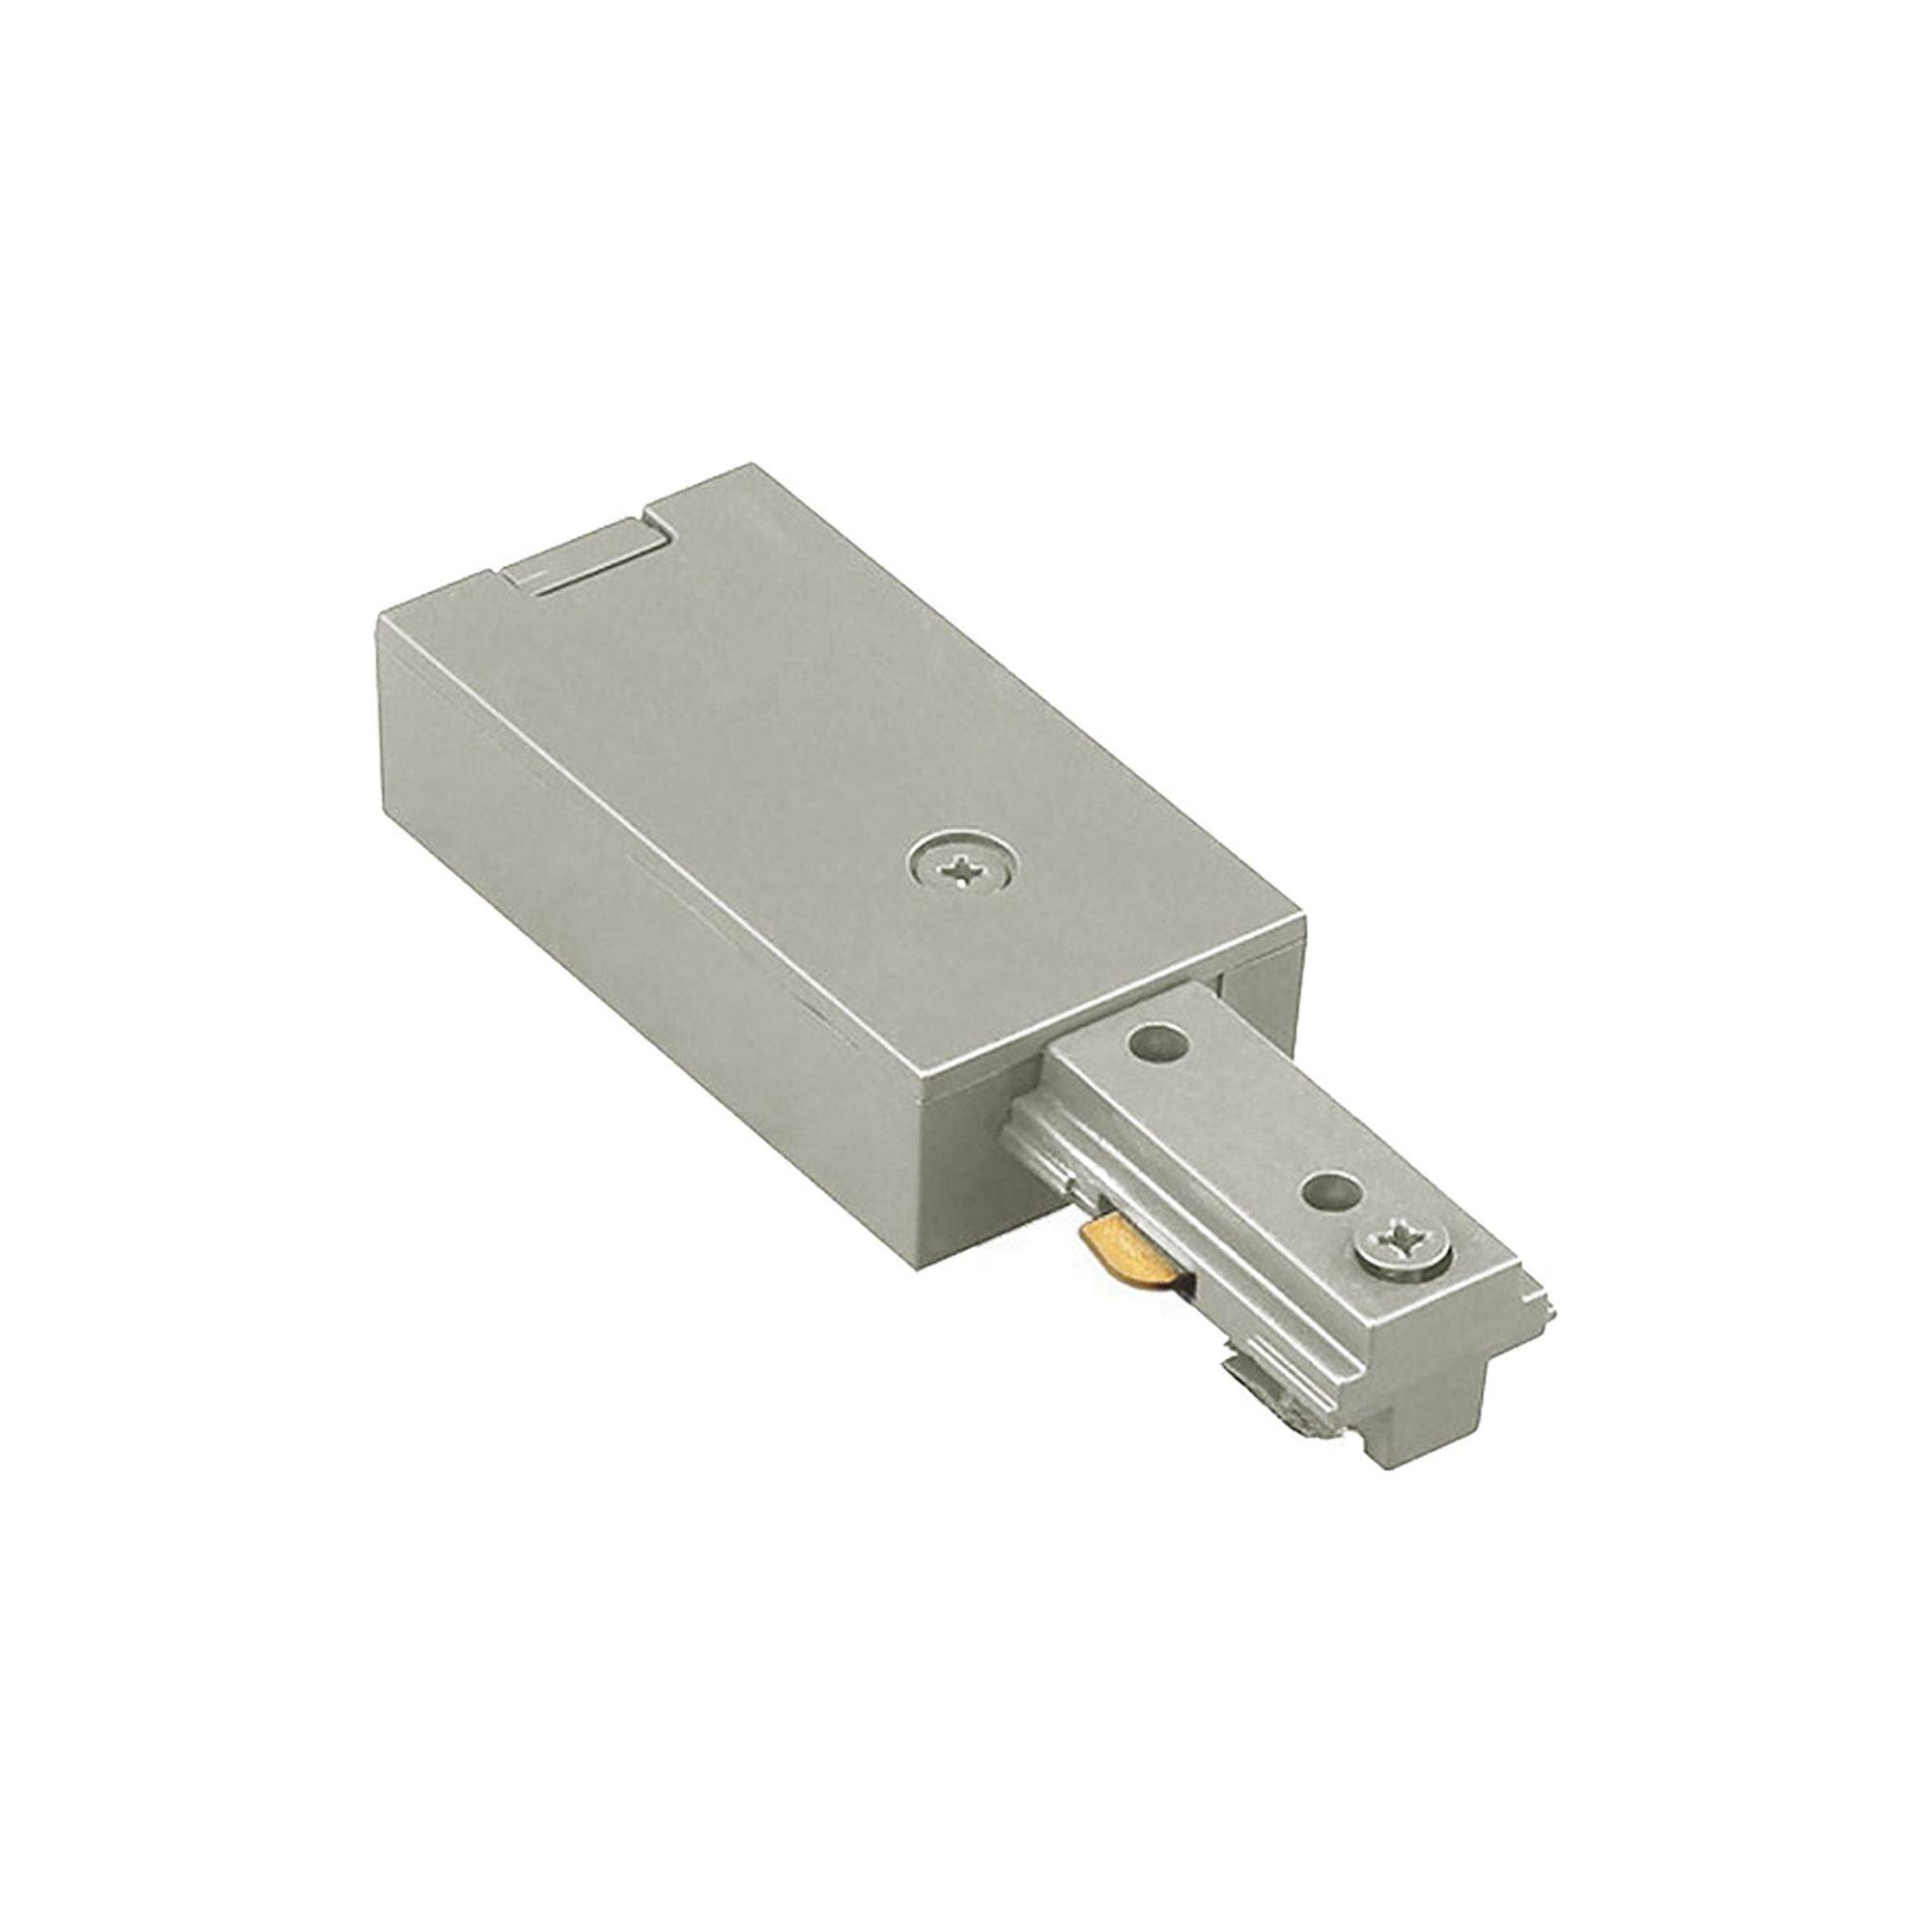 WAC Lighting - H Track Live End Connector - Lights Canada